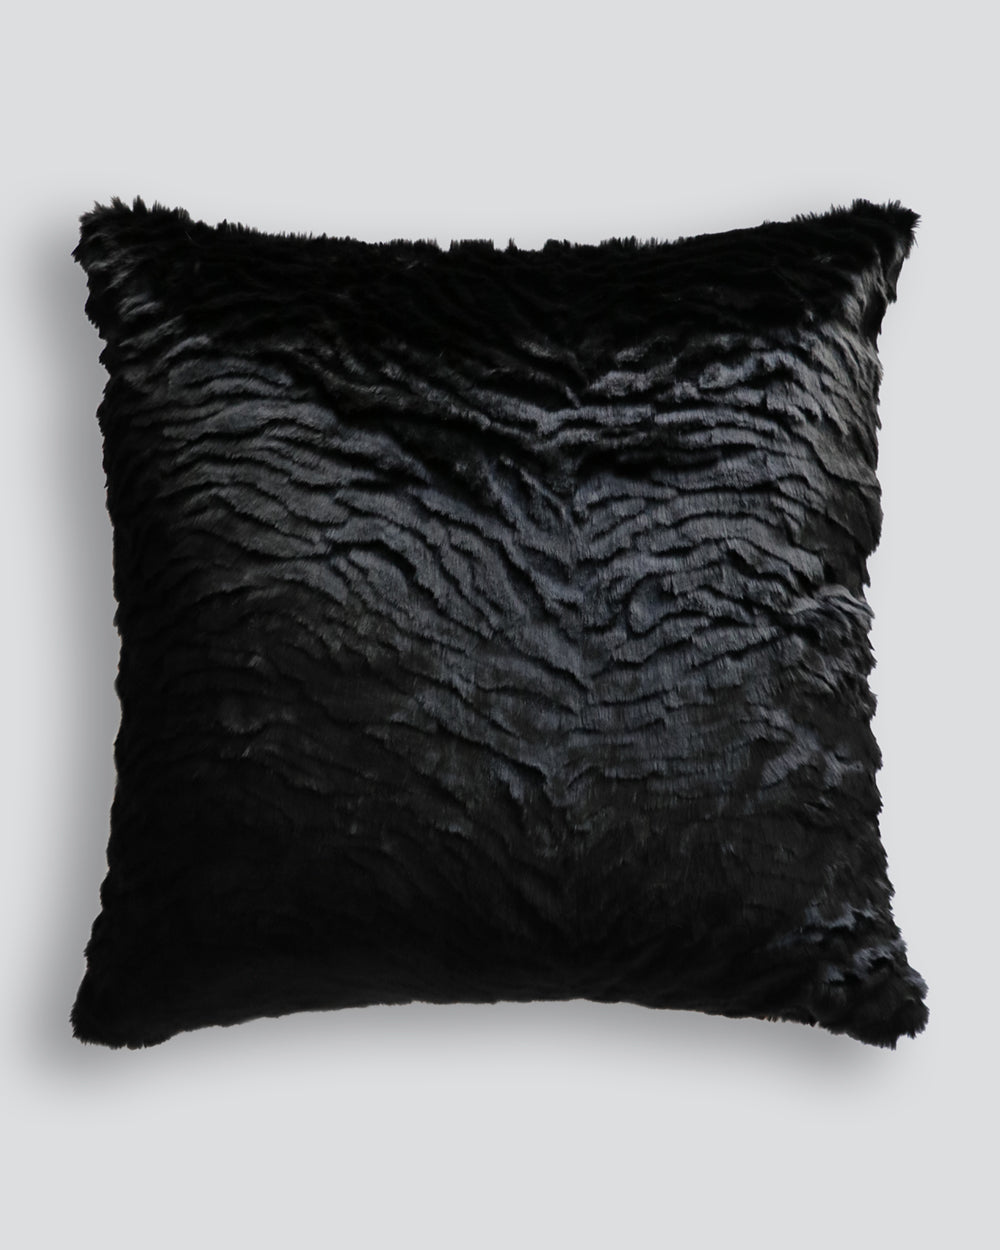 Heirloom Black Tiger Cushions in Faux Fur are available from Make Your House A Home Premium Stockist. Furniture Store Bendigo, Victoria. Australia Wide Delivery. Furtex Baya.